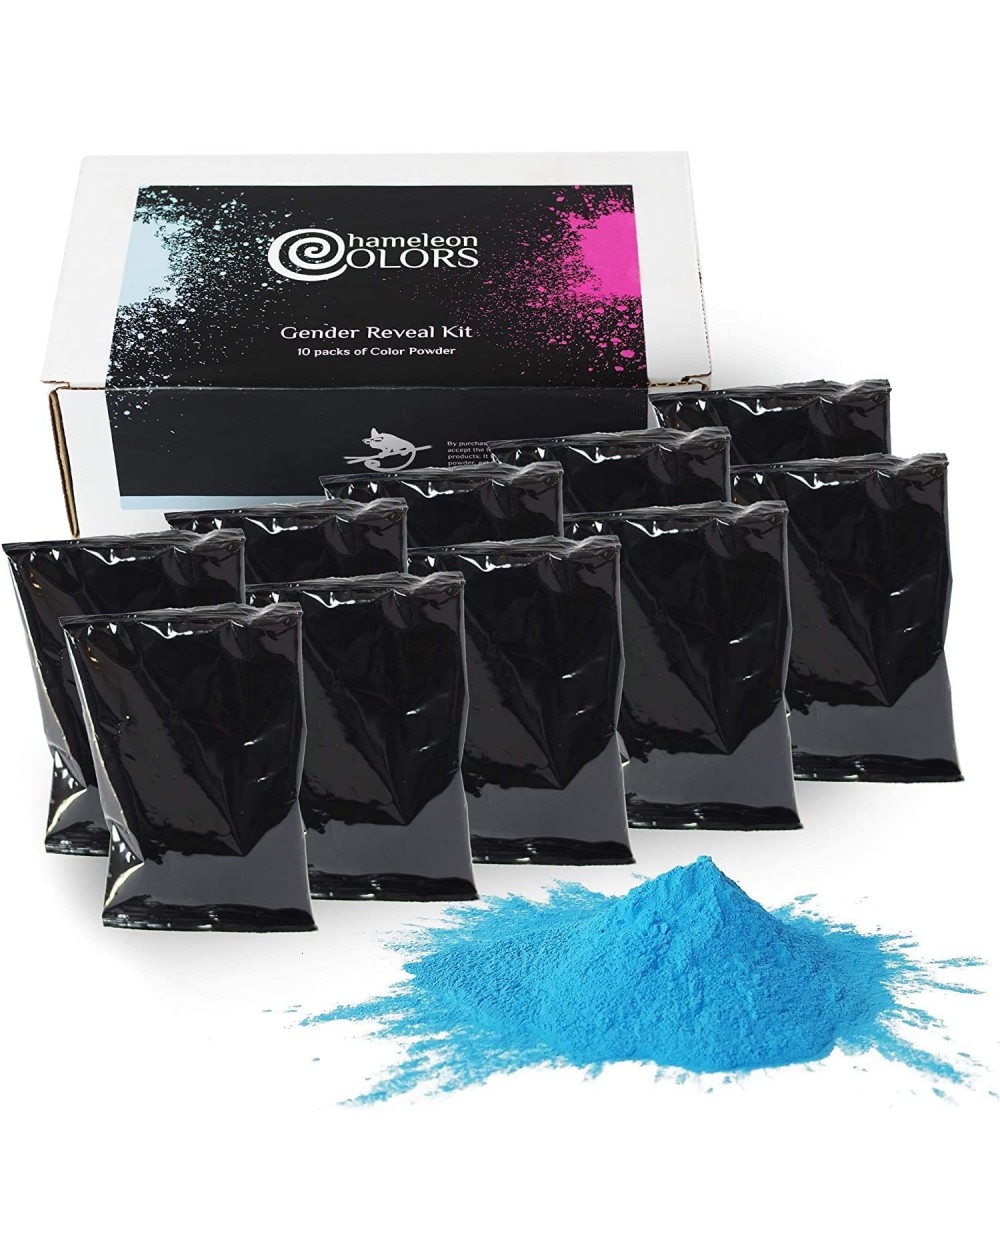 Party Games & Activities Holi Powder Gender Reveal - Blue Blackout 10 Pack - 70g Each. Same Pure- Authentic Color Used in Col...